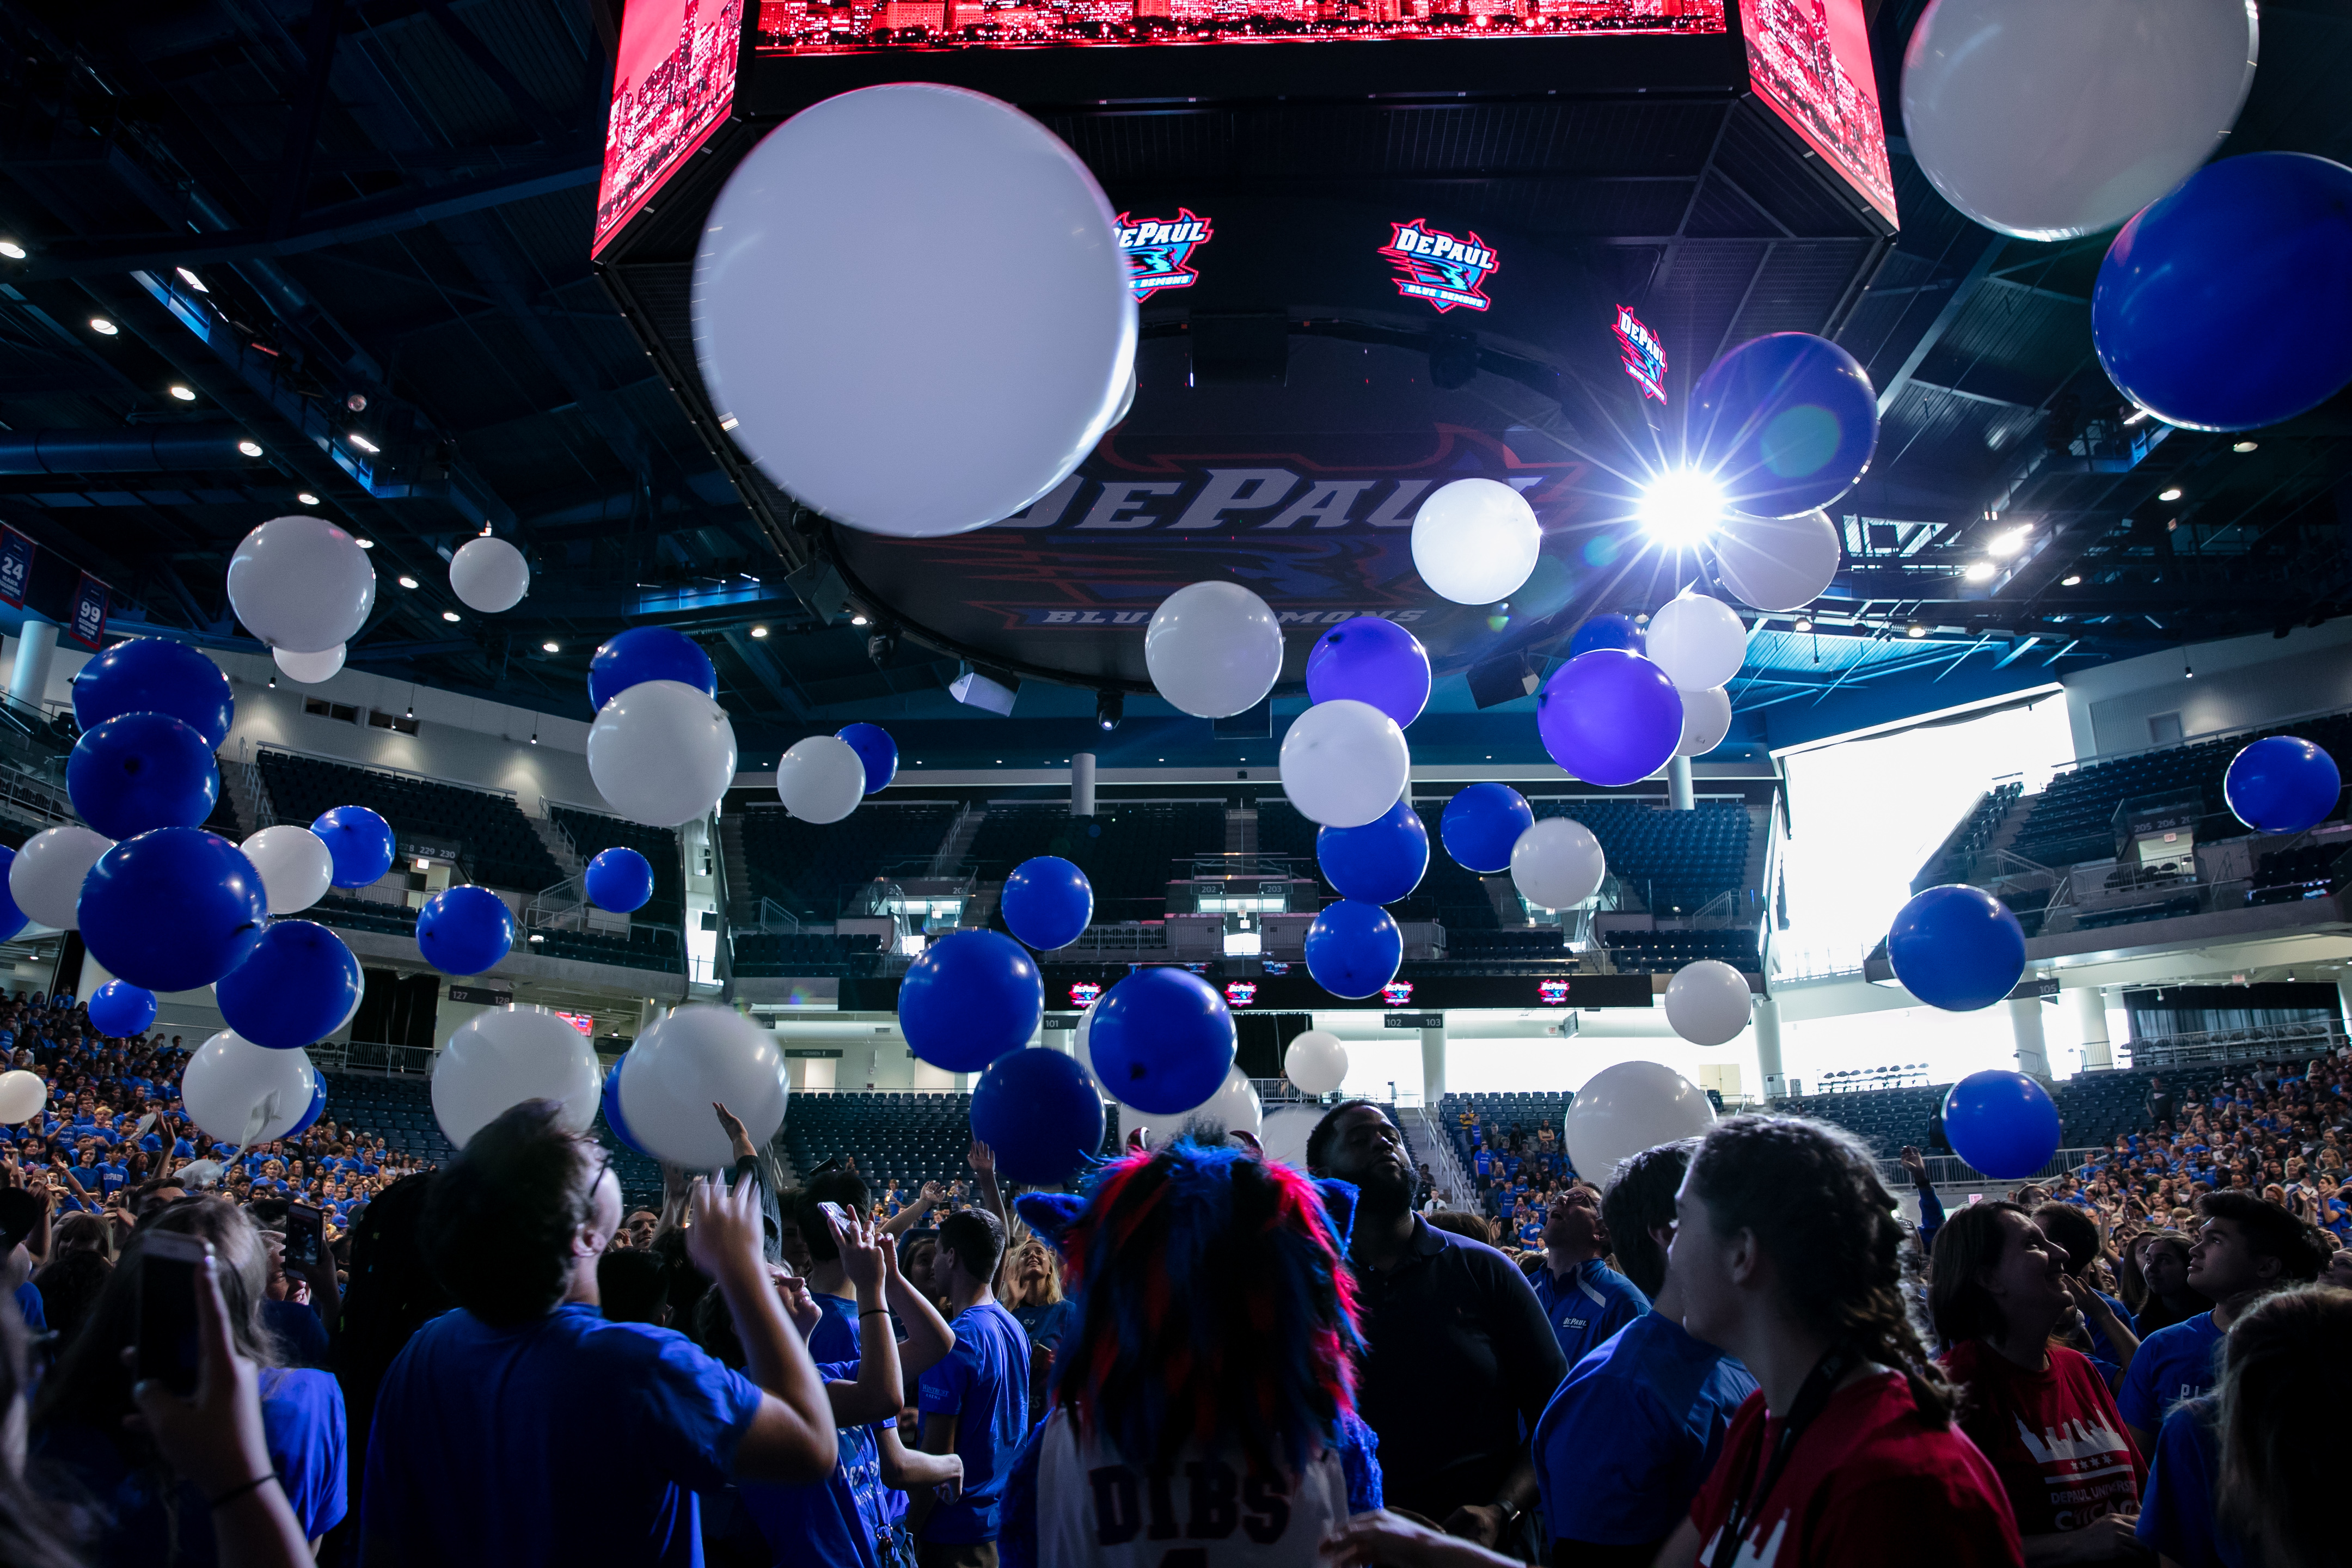 A surprise balloon drop ended the upbeat ceremony. (DePaul University/Randall Spriggs)